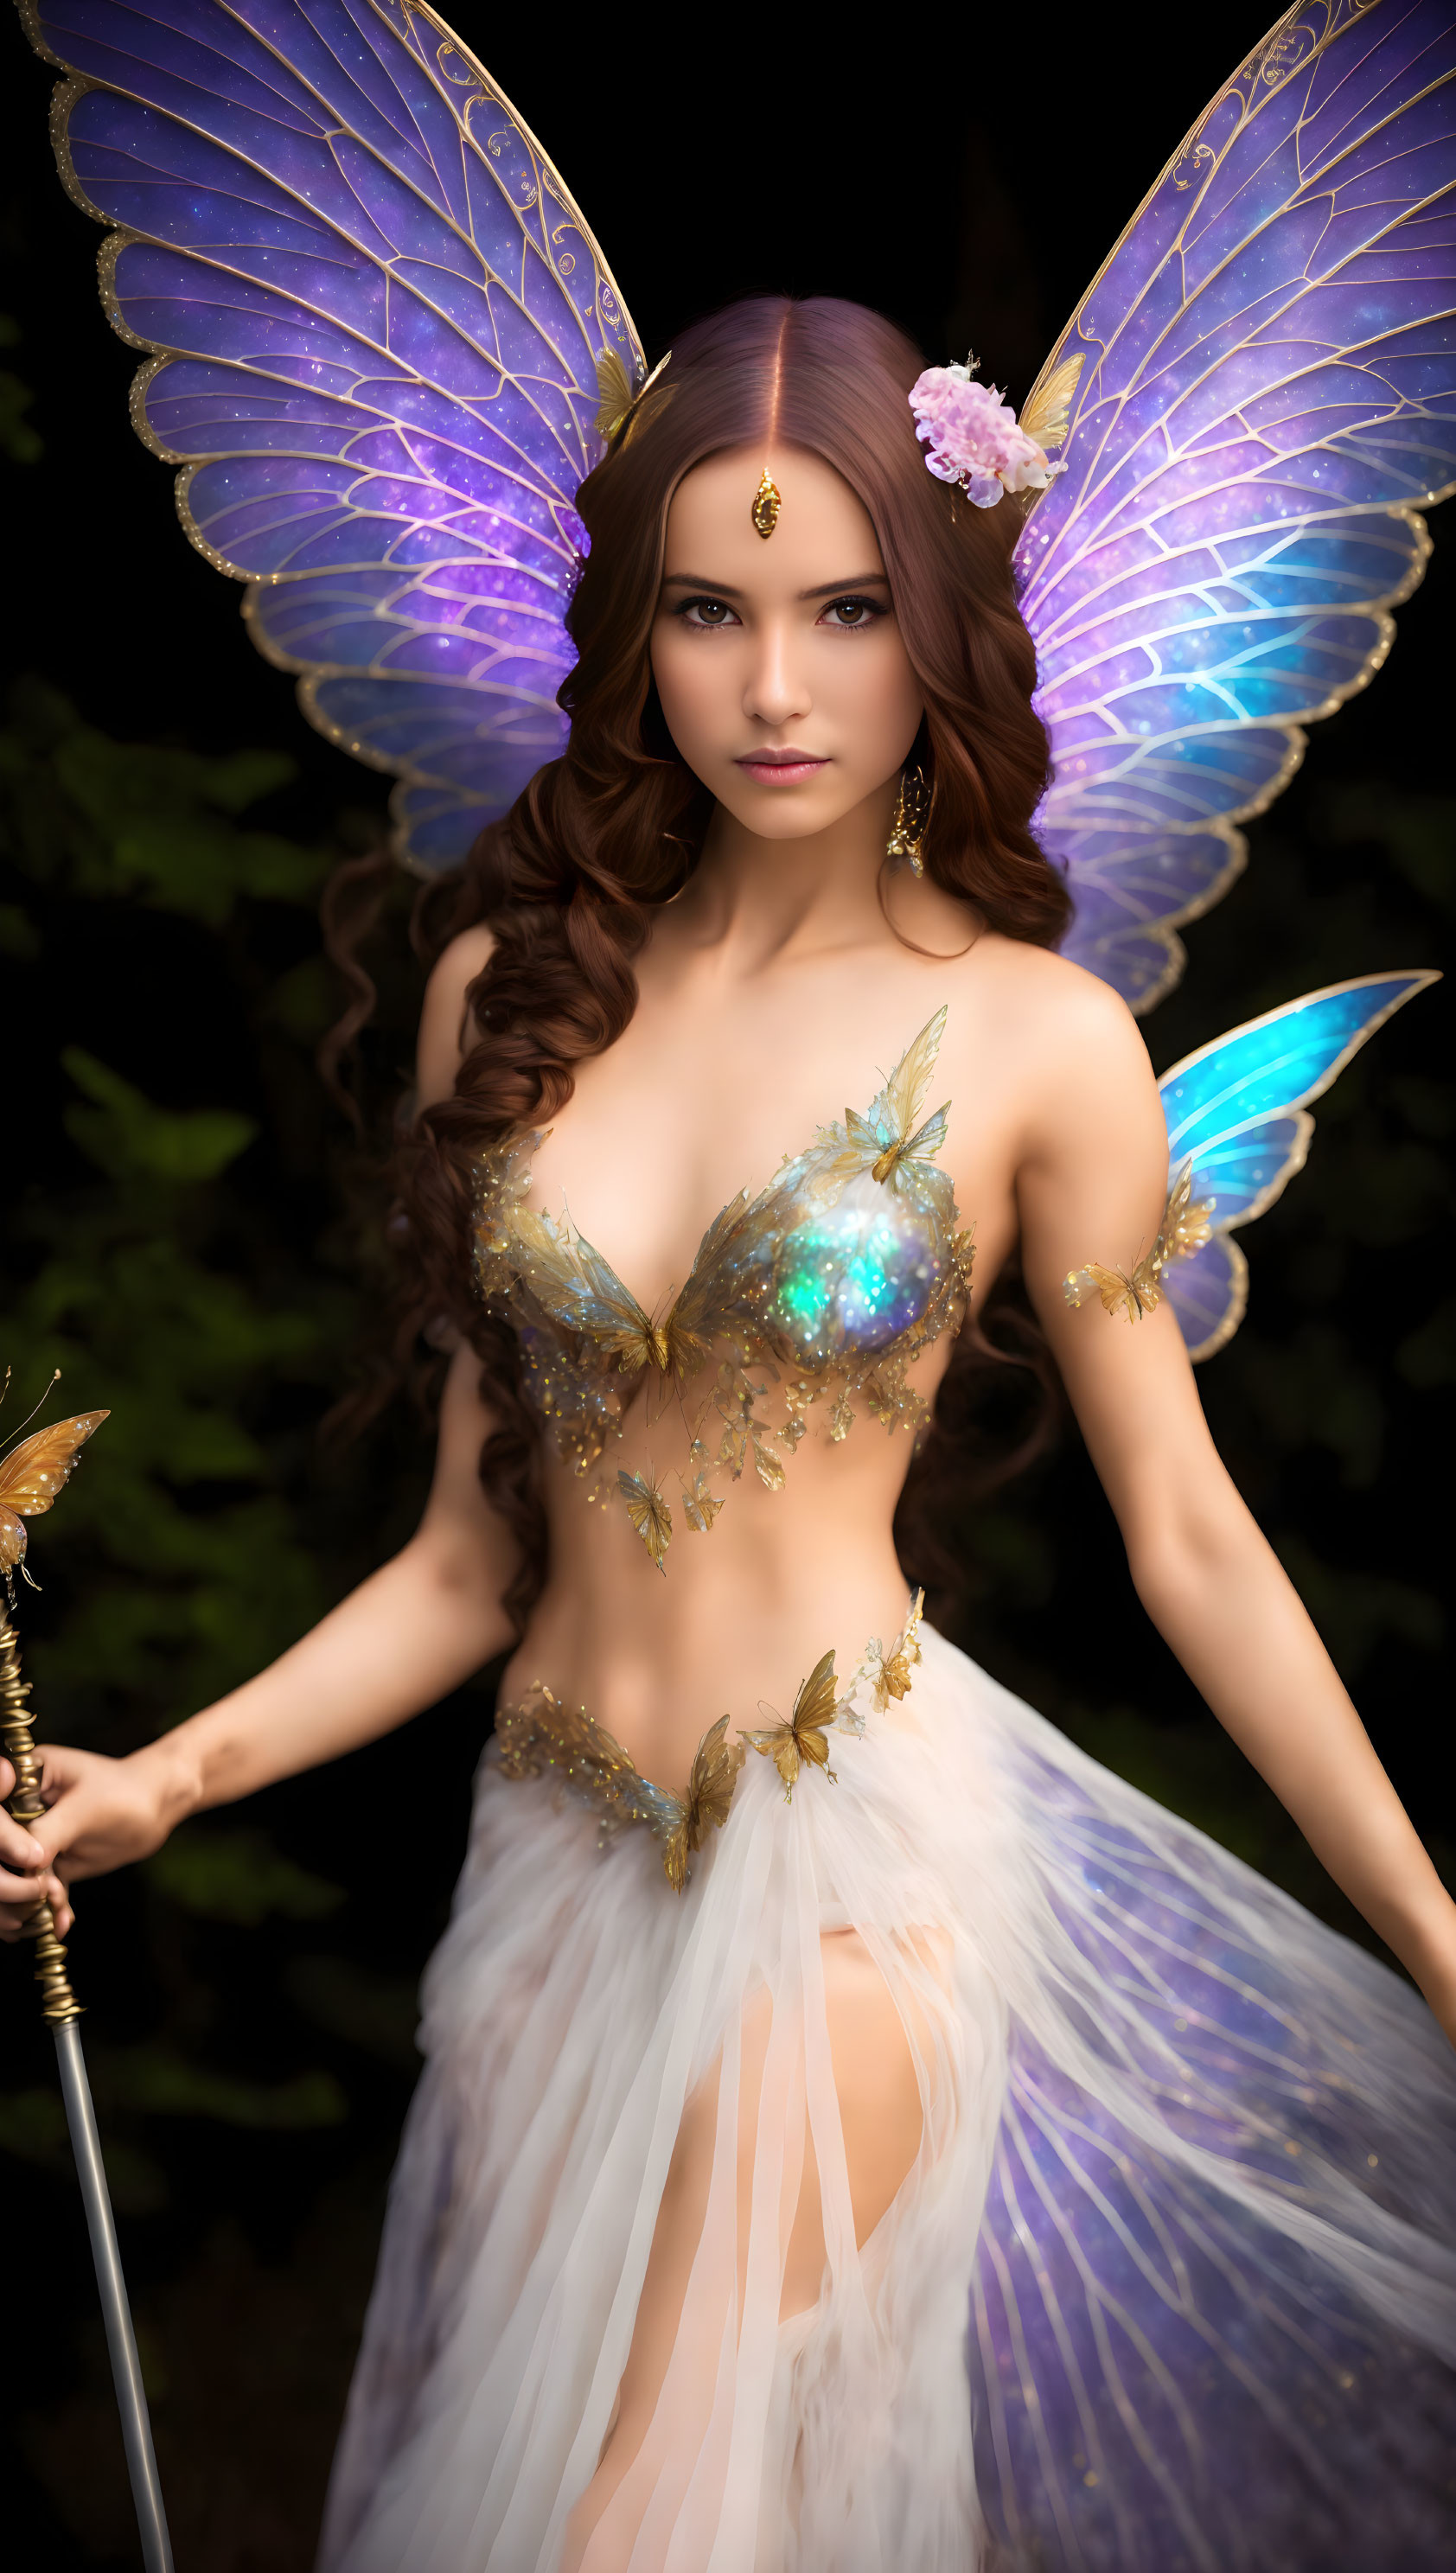 Fairy warrior with Butterfly-like wings